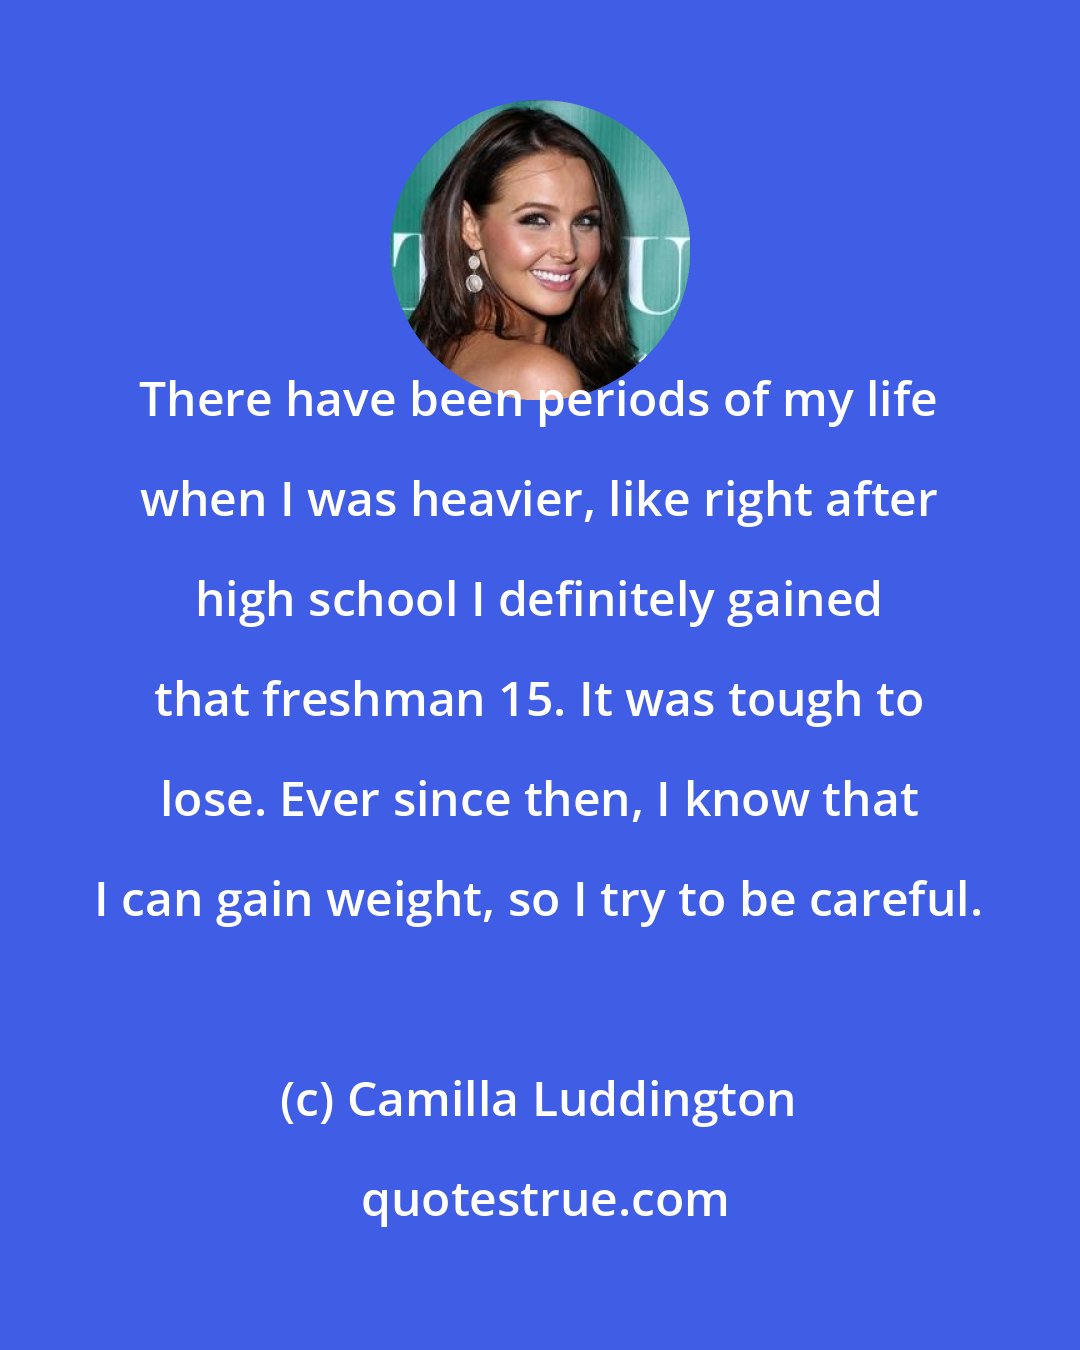 Camilla Luddington: There have been periods of my life when I was heavier, like right after high school I definitely gained that freshman 15. It was tough to lose. Ever since then, I know that I can gain weight, so I try to be careful.